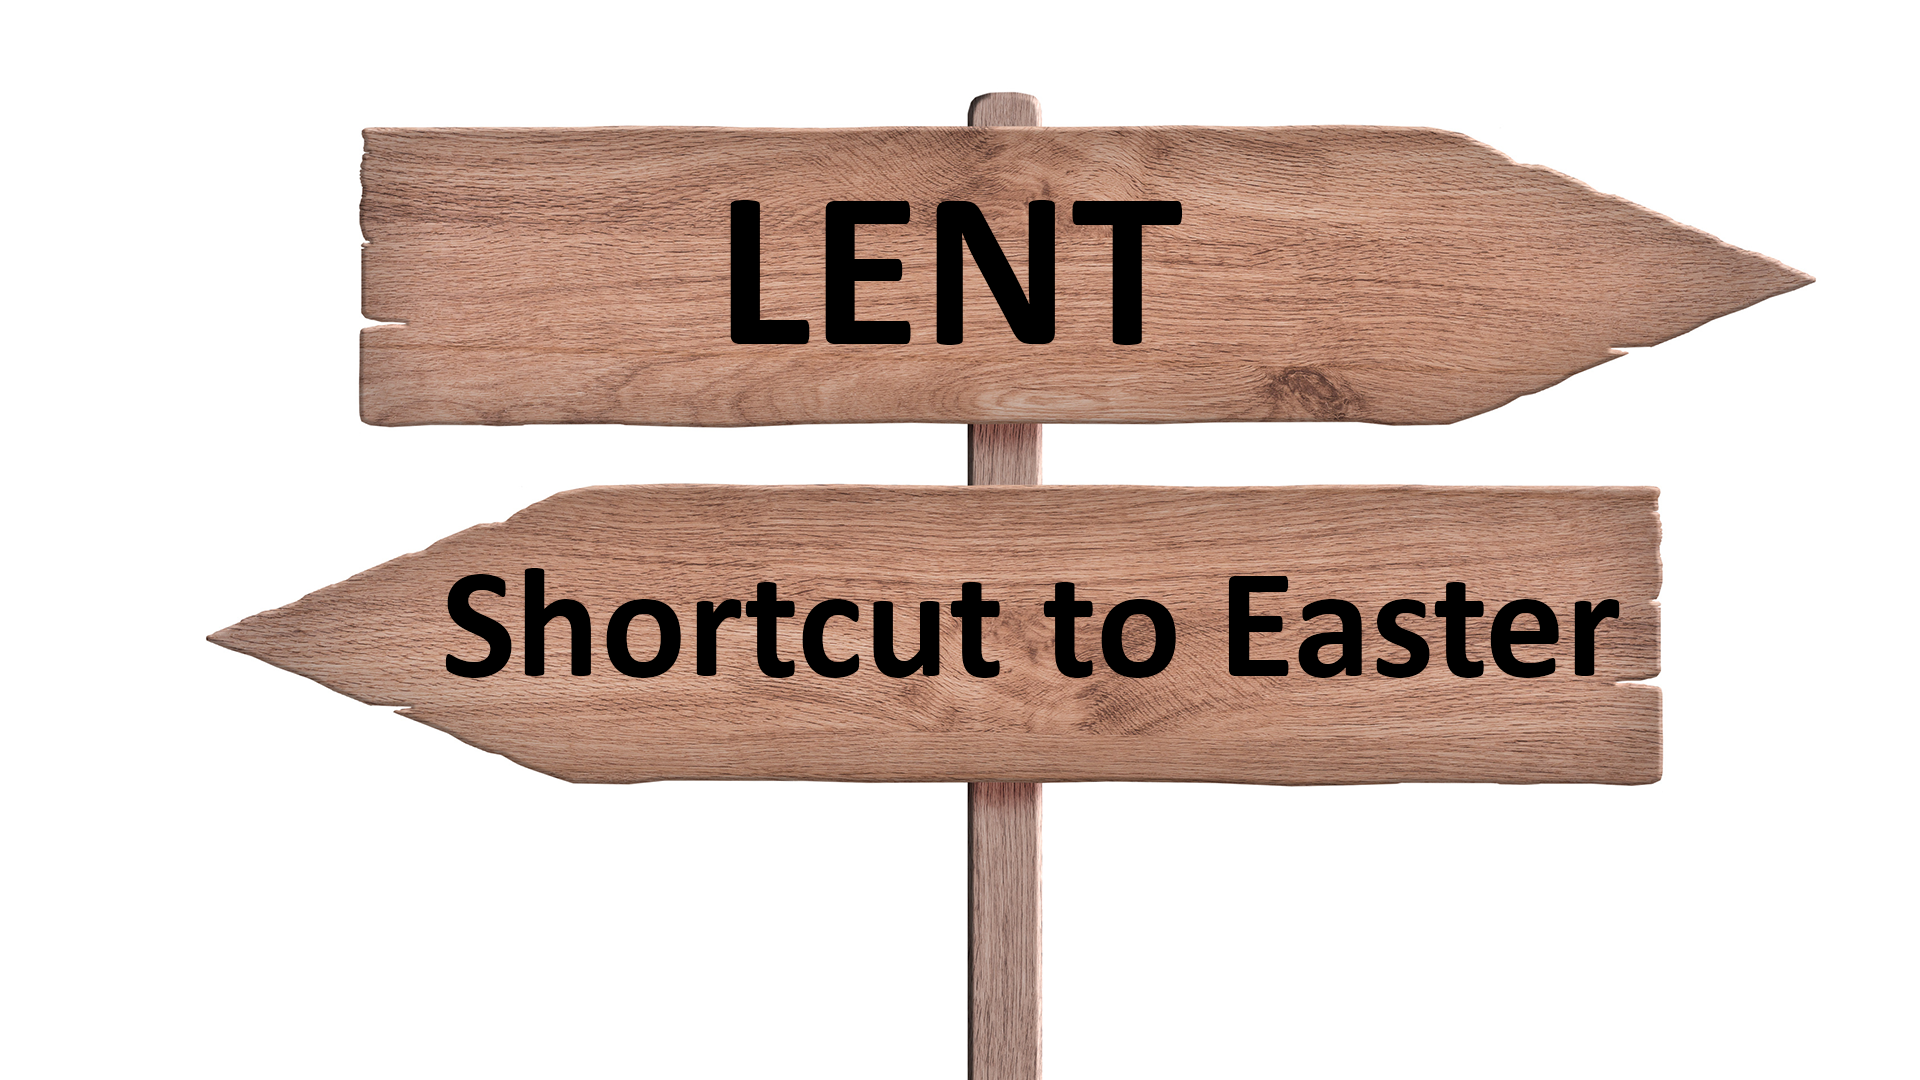 Shortcut to Easter?